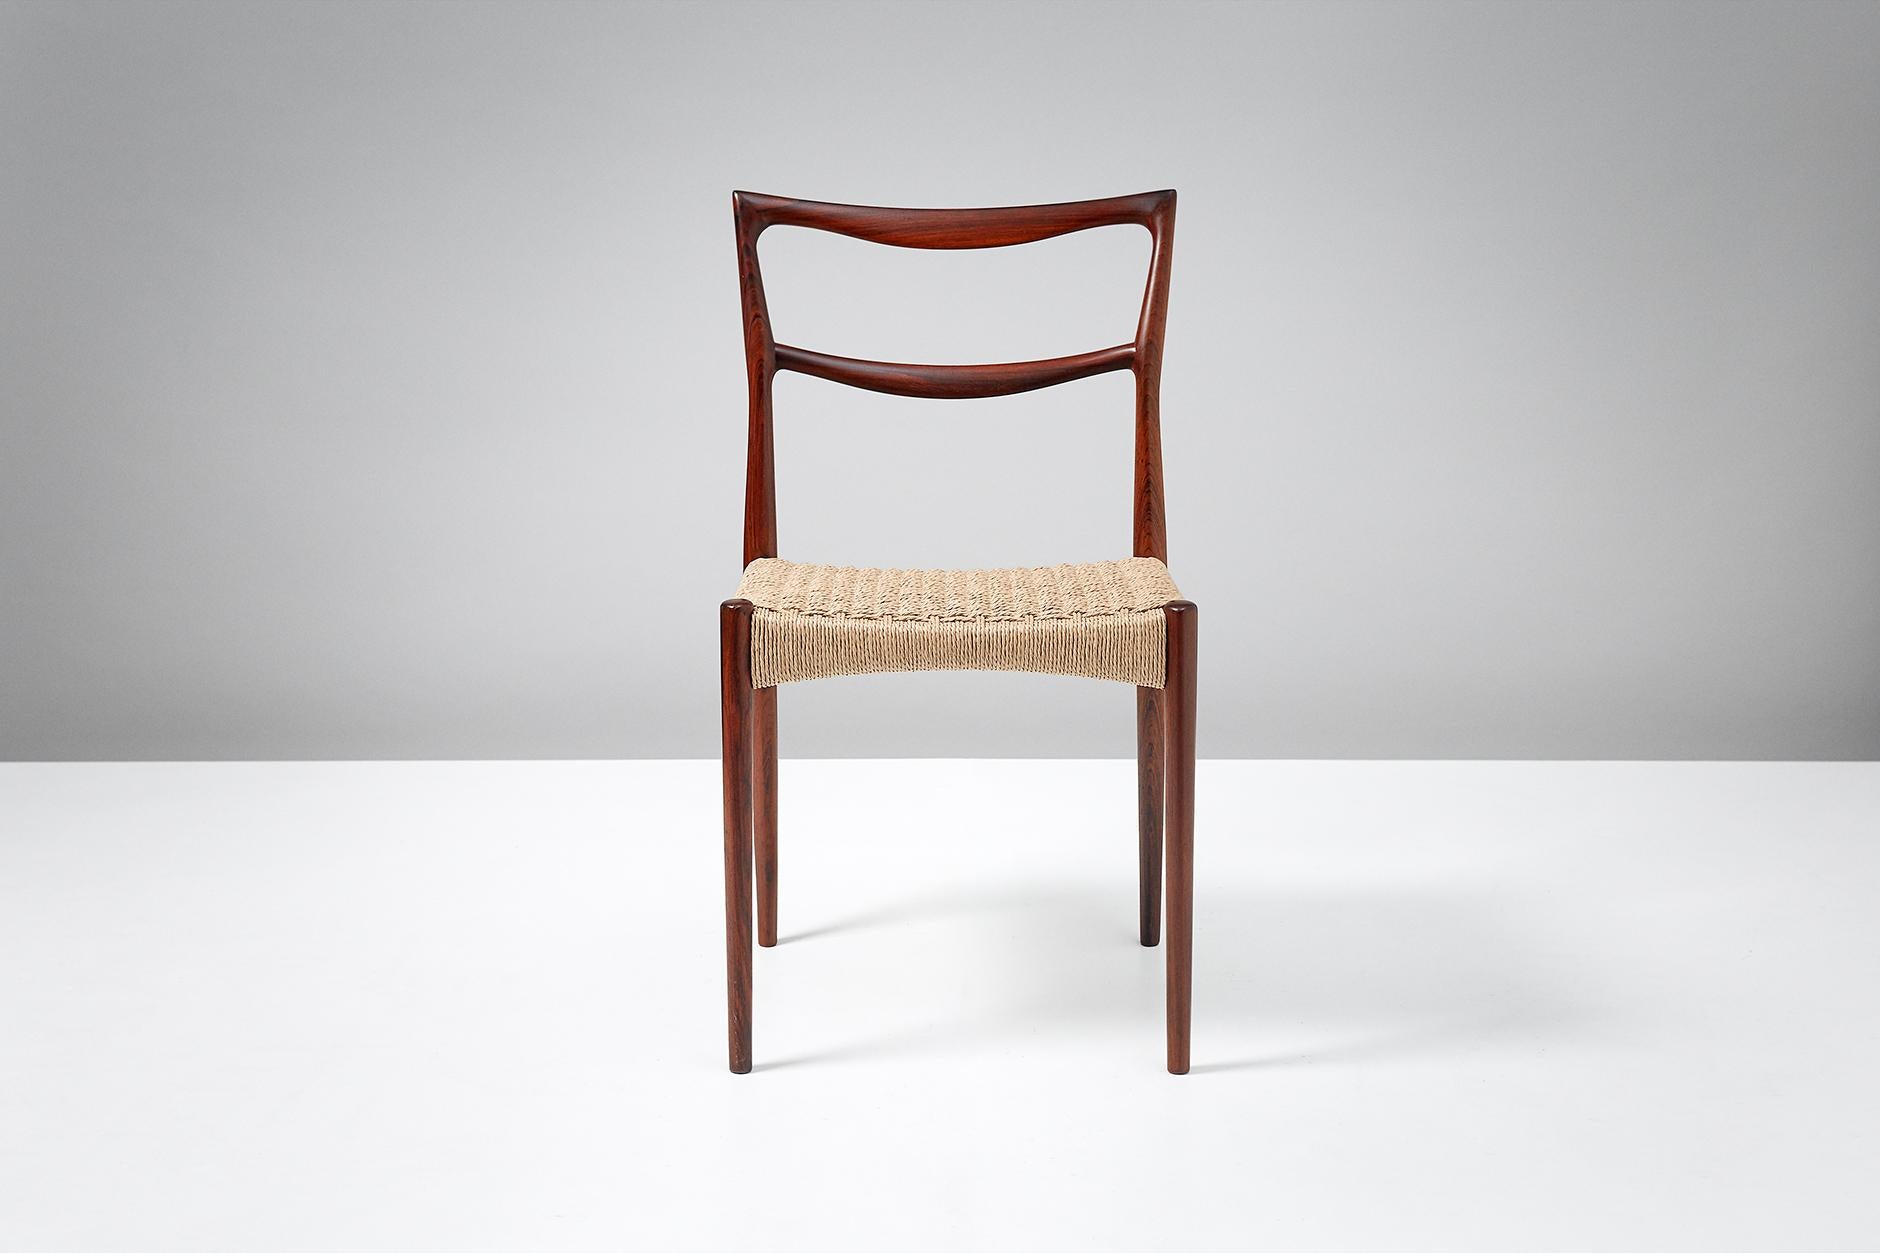 Rarely seen, sculptural side chair. Rosewood frame with woven papercord seat.